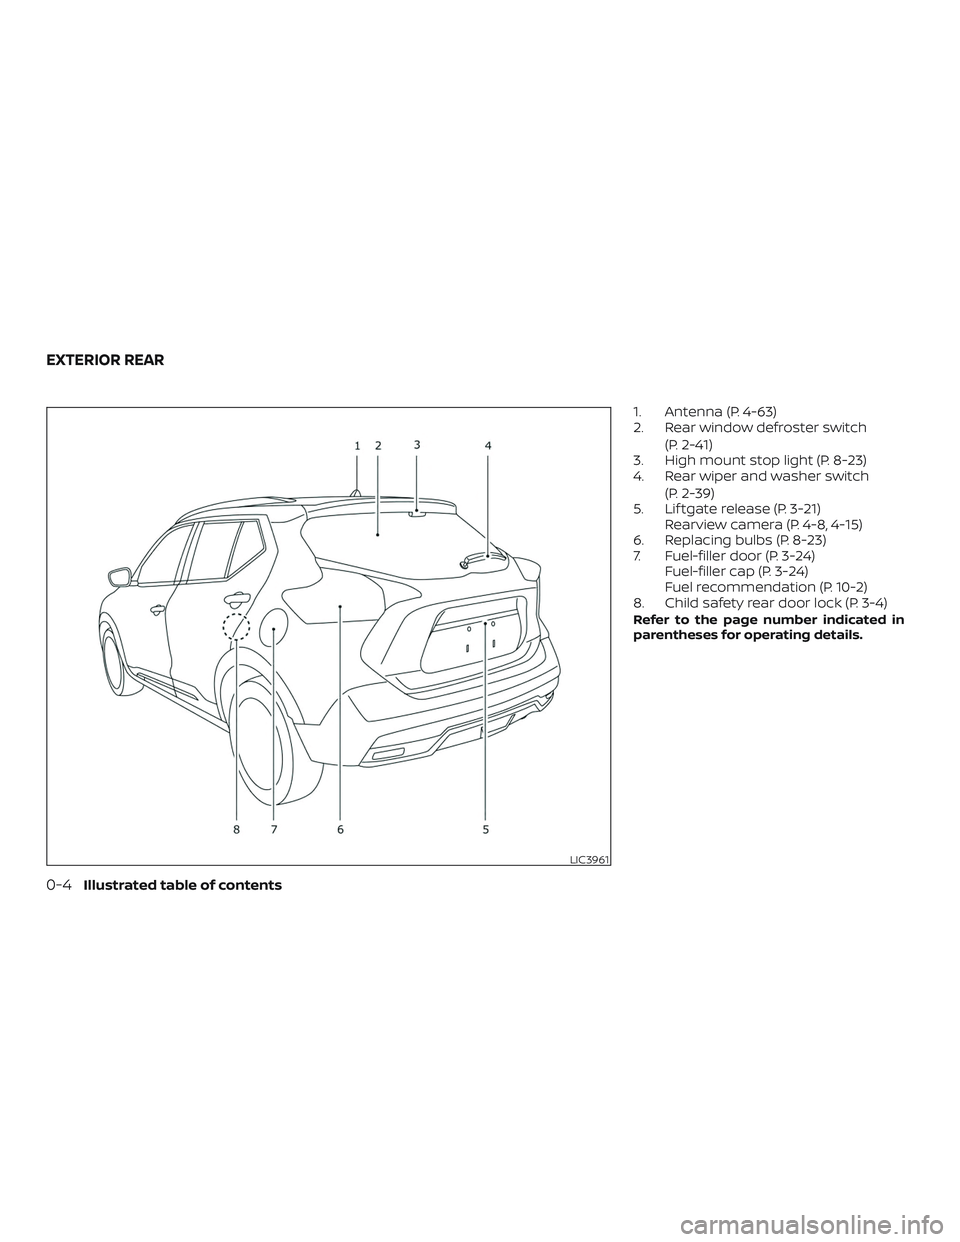 NISSAN KICKS 2019  Owner´s Manual 1. Antenna (P. 4-63)
2. Rear window defroster switch(P. 2-41)
3. High mount stop light (P. 8-23)
4. Rear wiper and washer switch
(P. 2-39)
5. Lif tgate release (P. 3-21) Rearview camera (P. 4-8, 4-15)